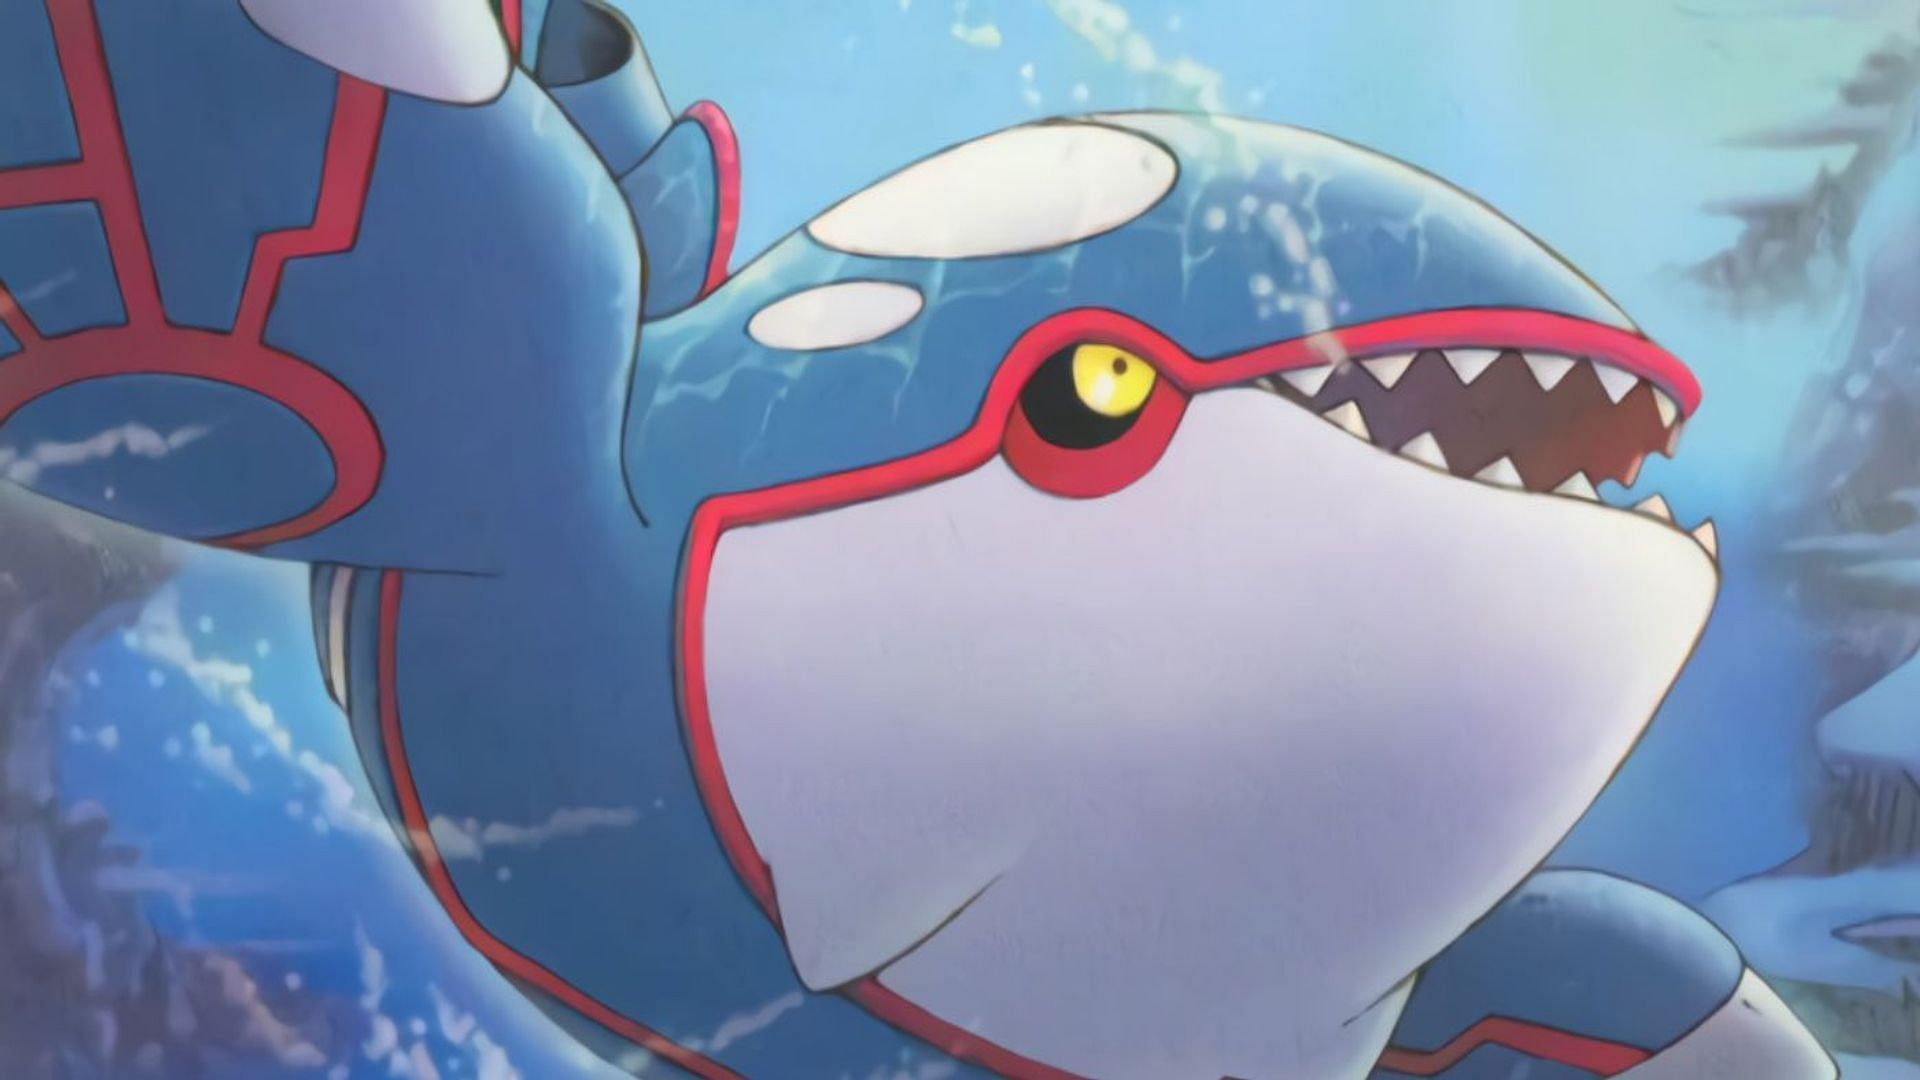 Kyogre as it appears in the Trading Card Game (Image via The Pokemon Company)